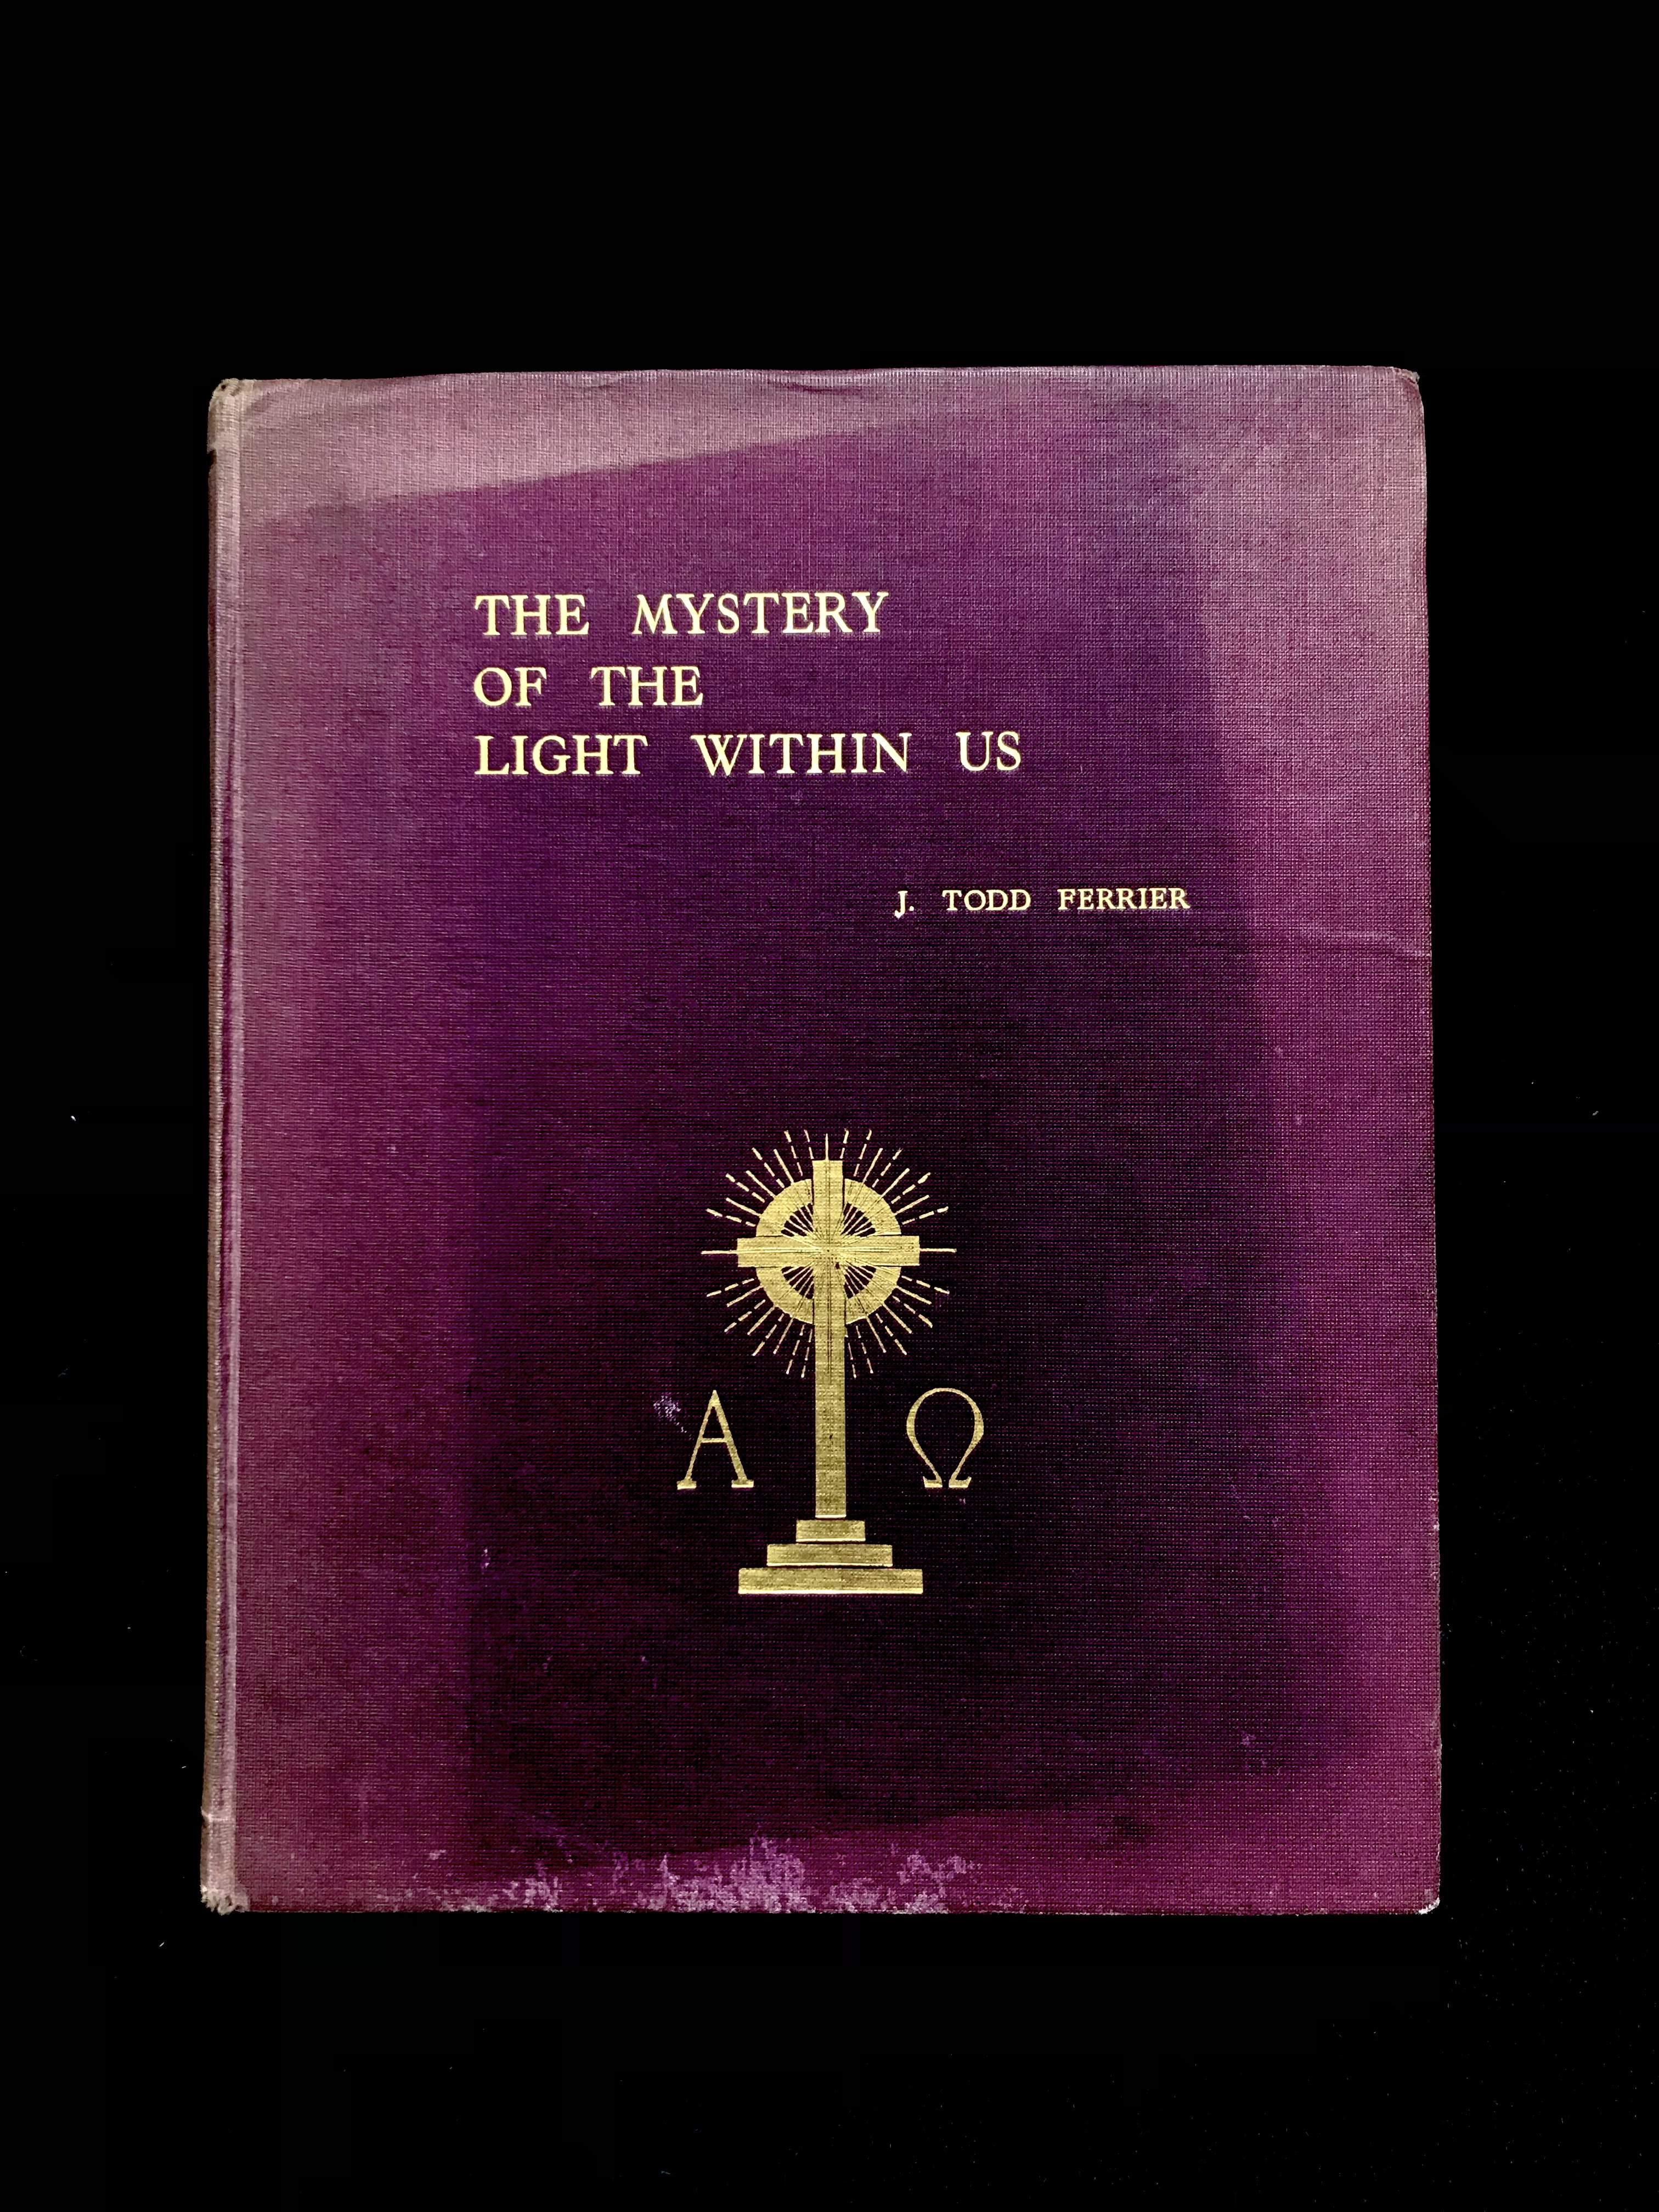 The Mystery Of The Light Within Us by J. Todd Ferrier